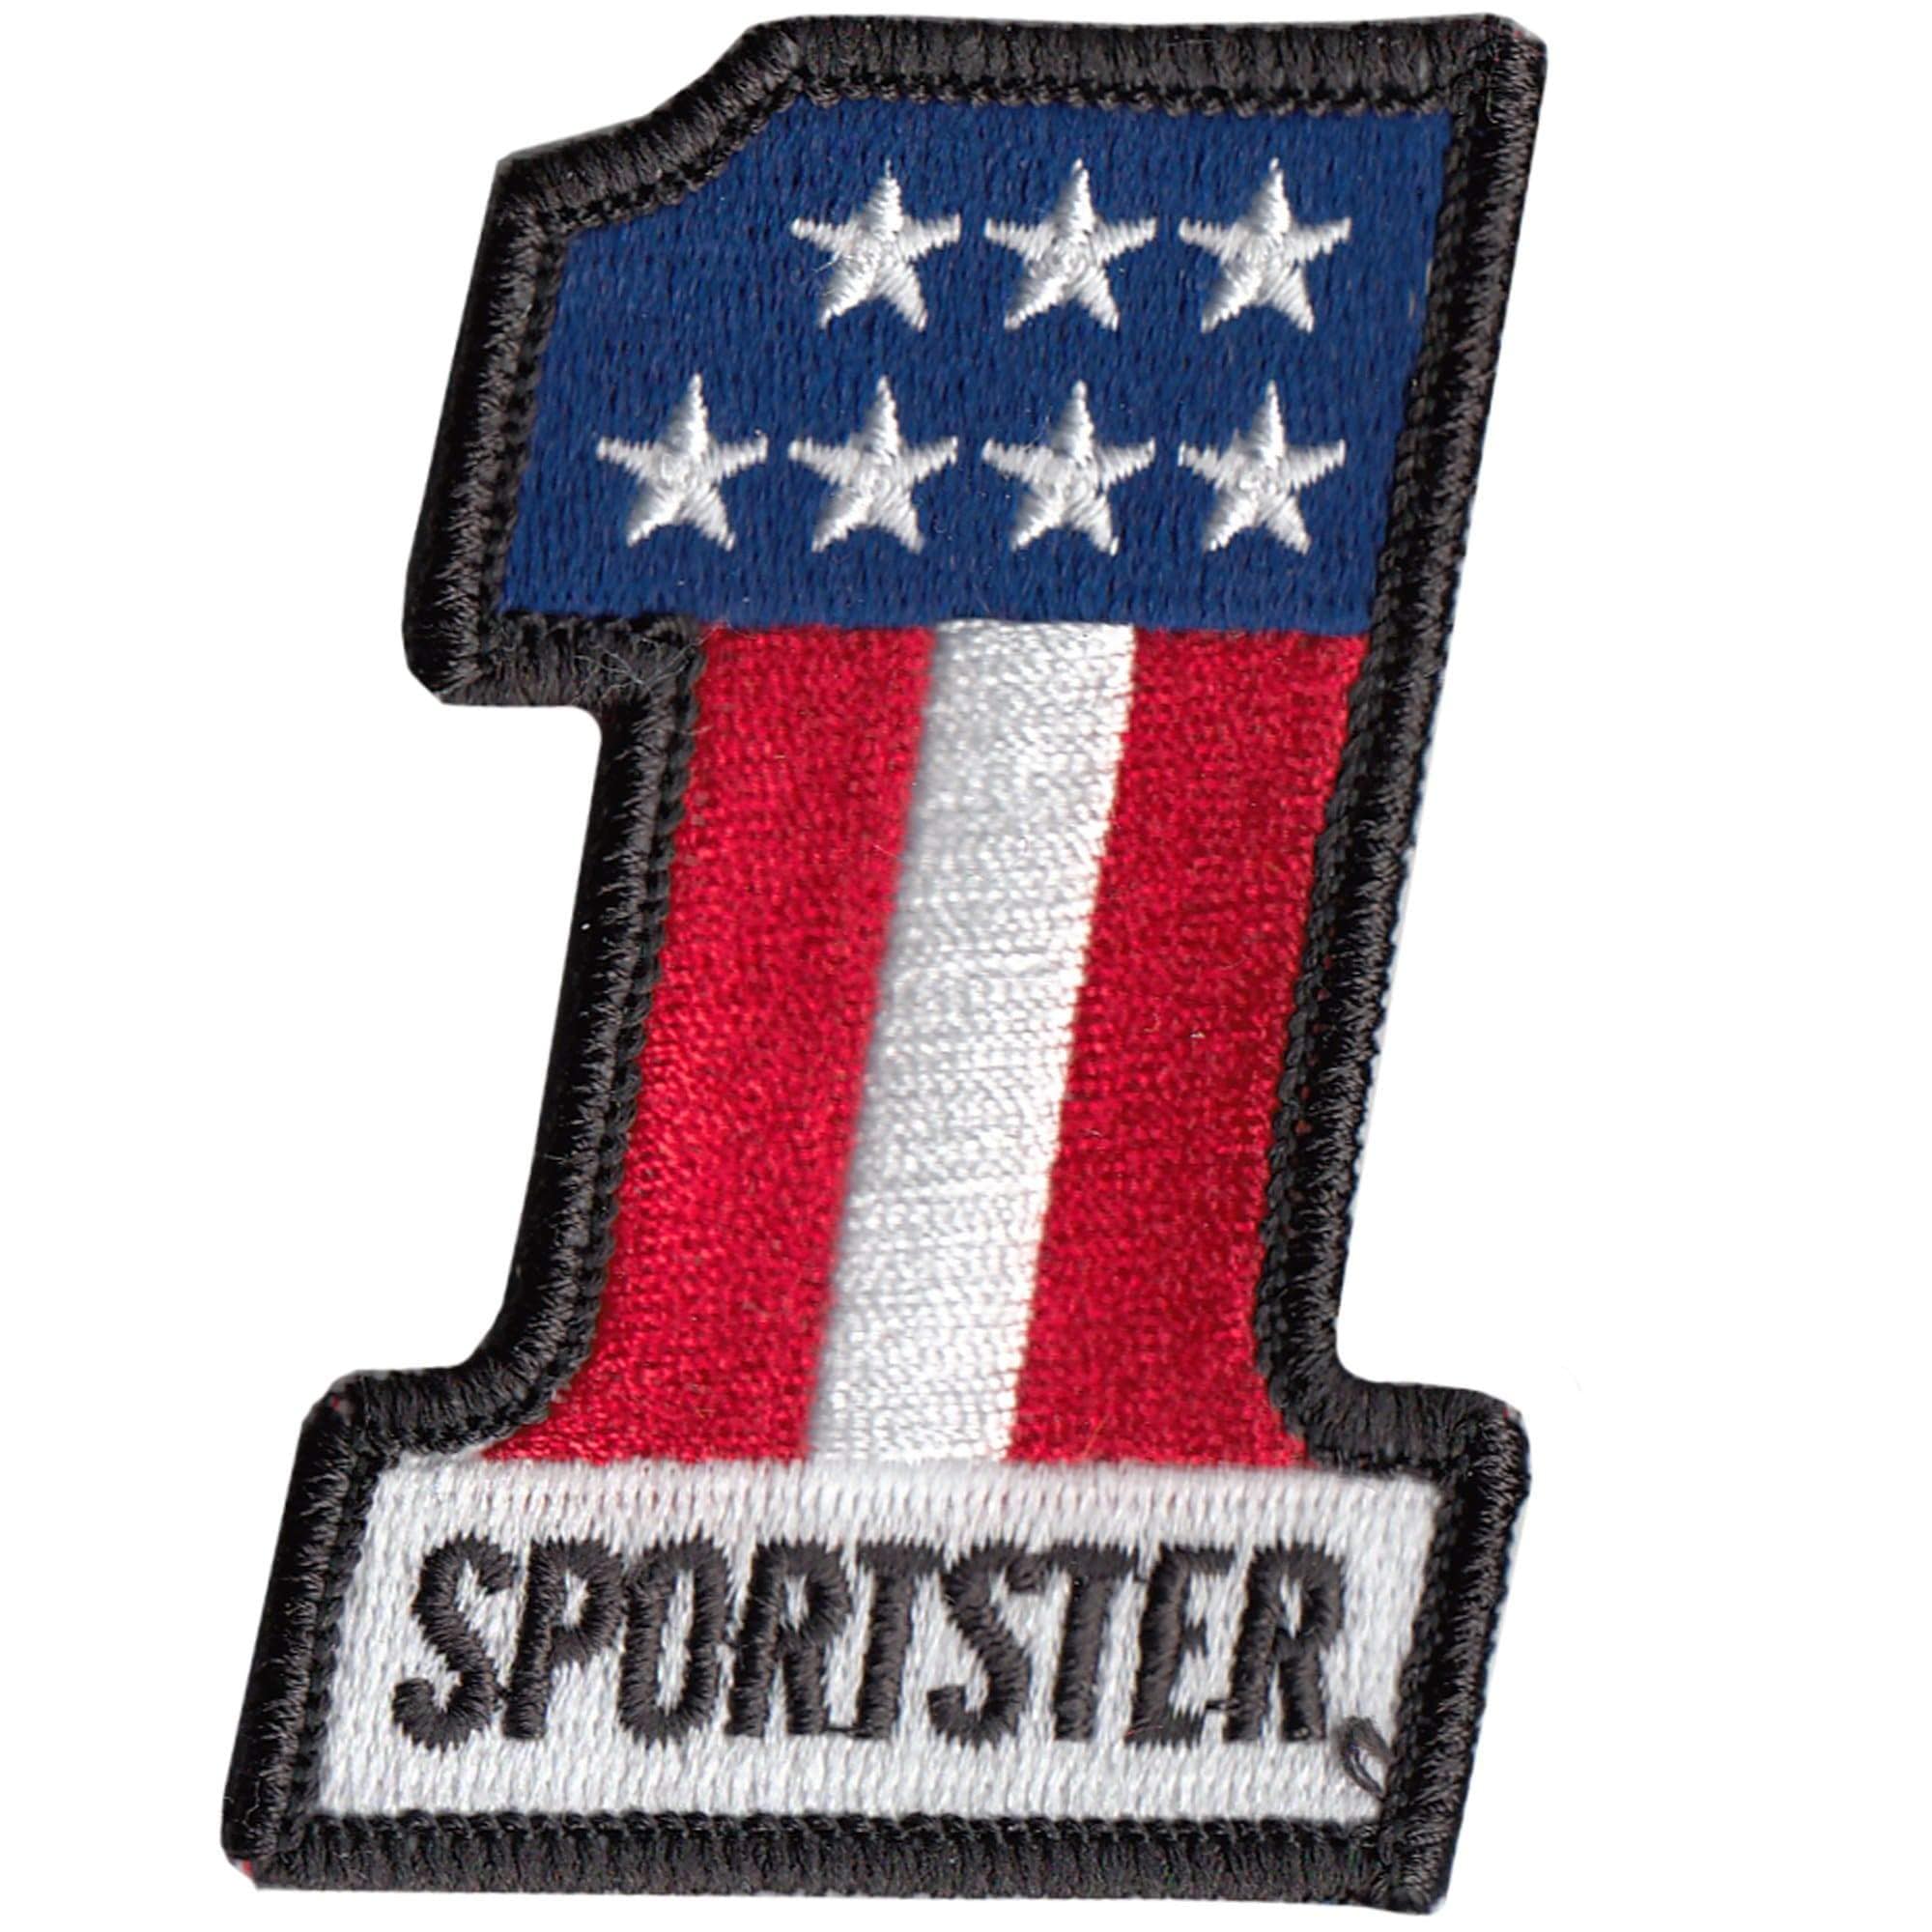 Lowbrow Customs #1 Sportster Motorcycle Patch